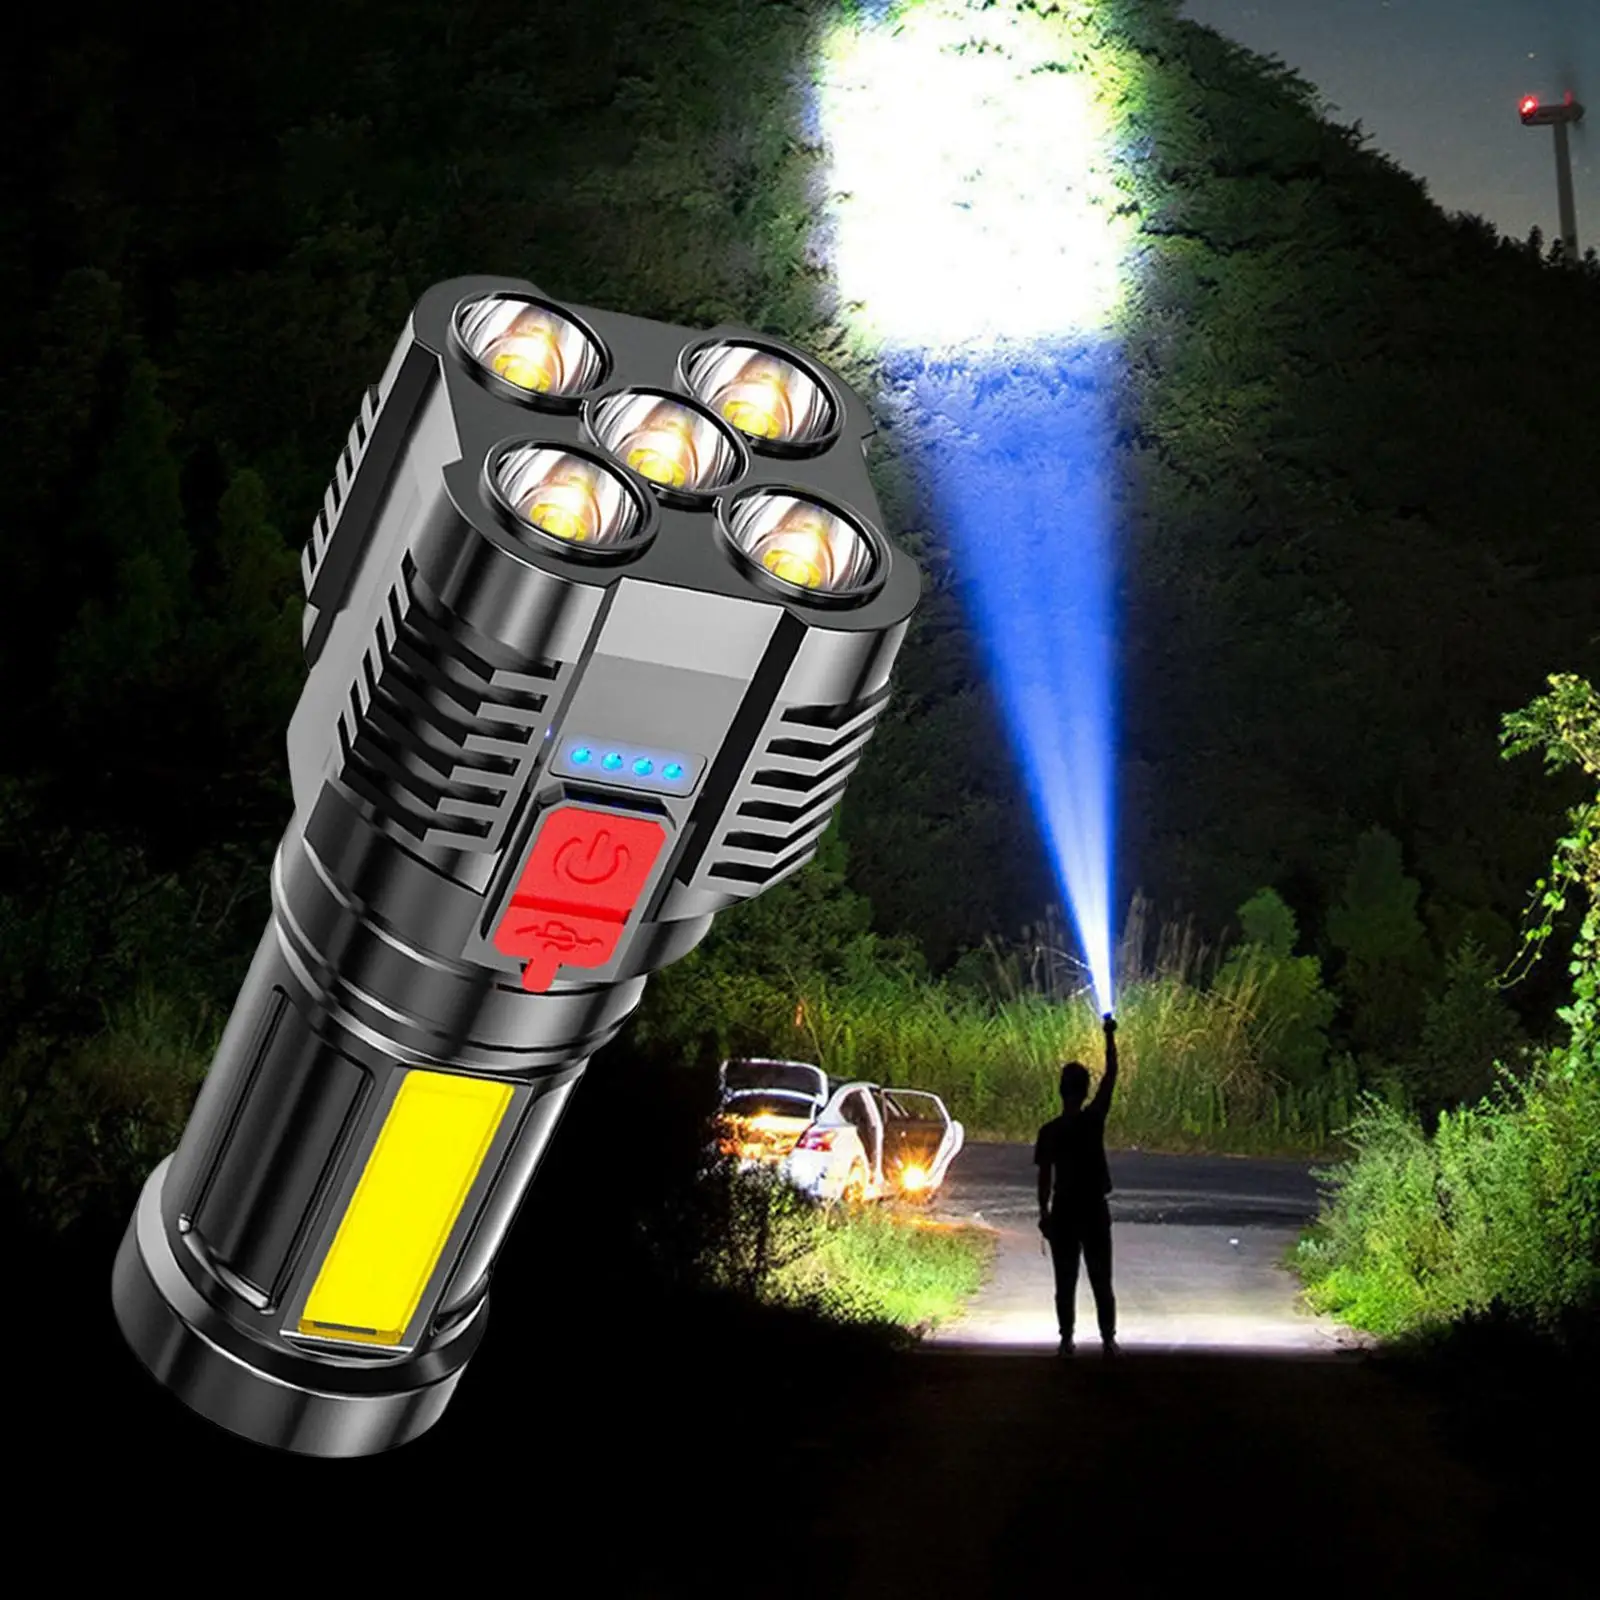 Portable Searchlight Hand  Super Bright for Sports, Indoor, Camping,